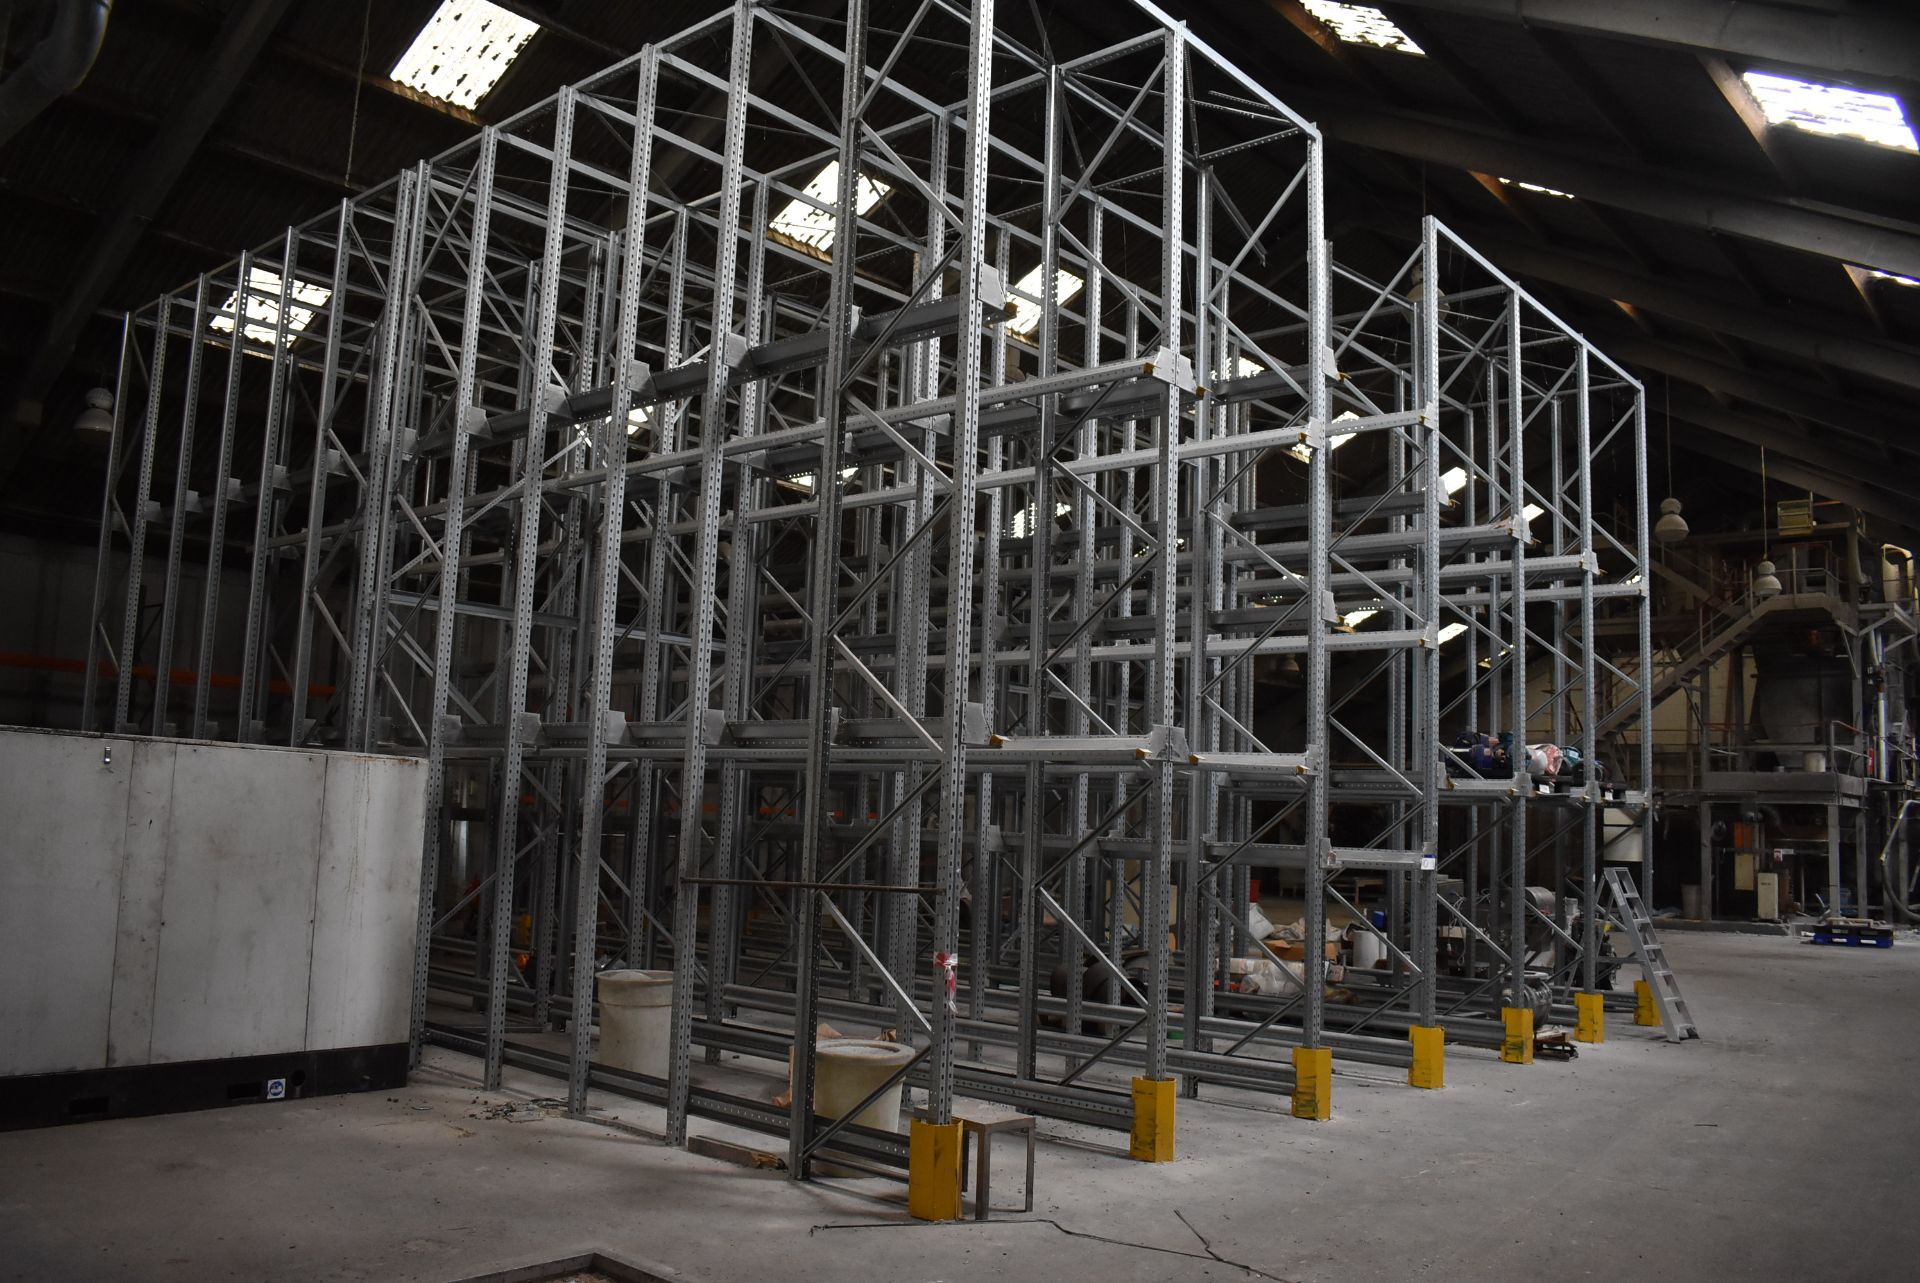 Dexion P90 M SIX BAY THREE TIER DRIVE-IN PALLET RACK, approx. 10m x 10.8m x 6m high overall, for - Image 2 of 6